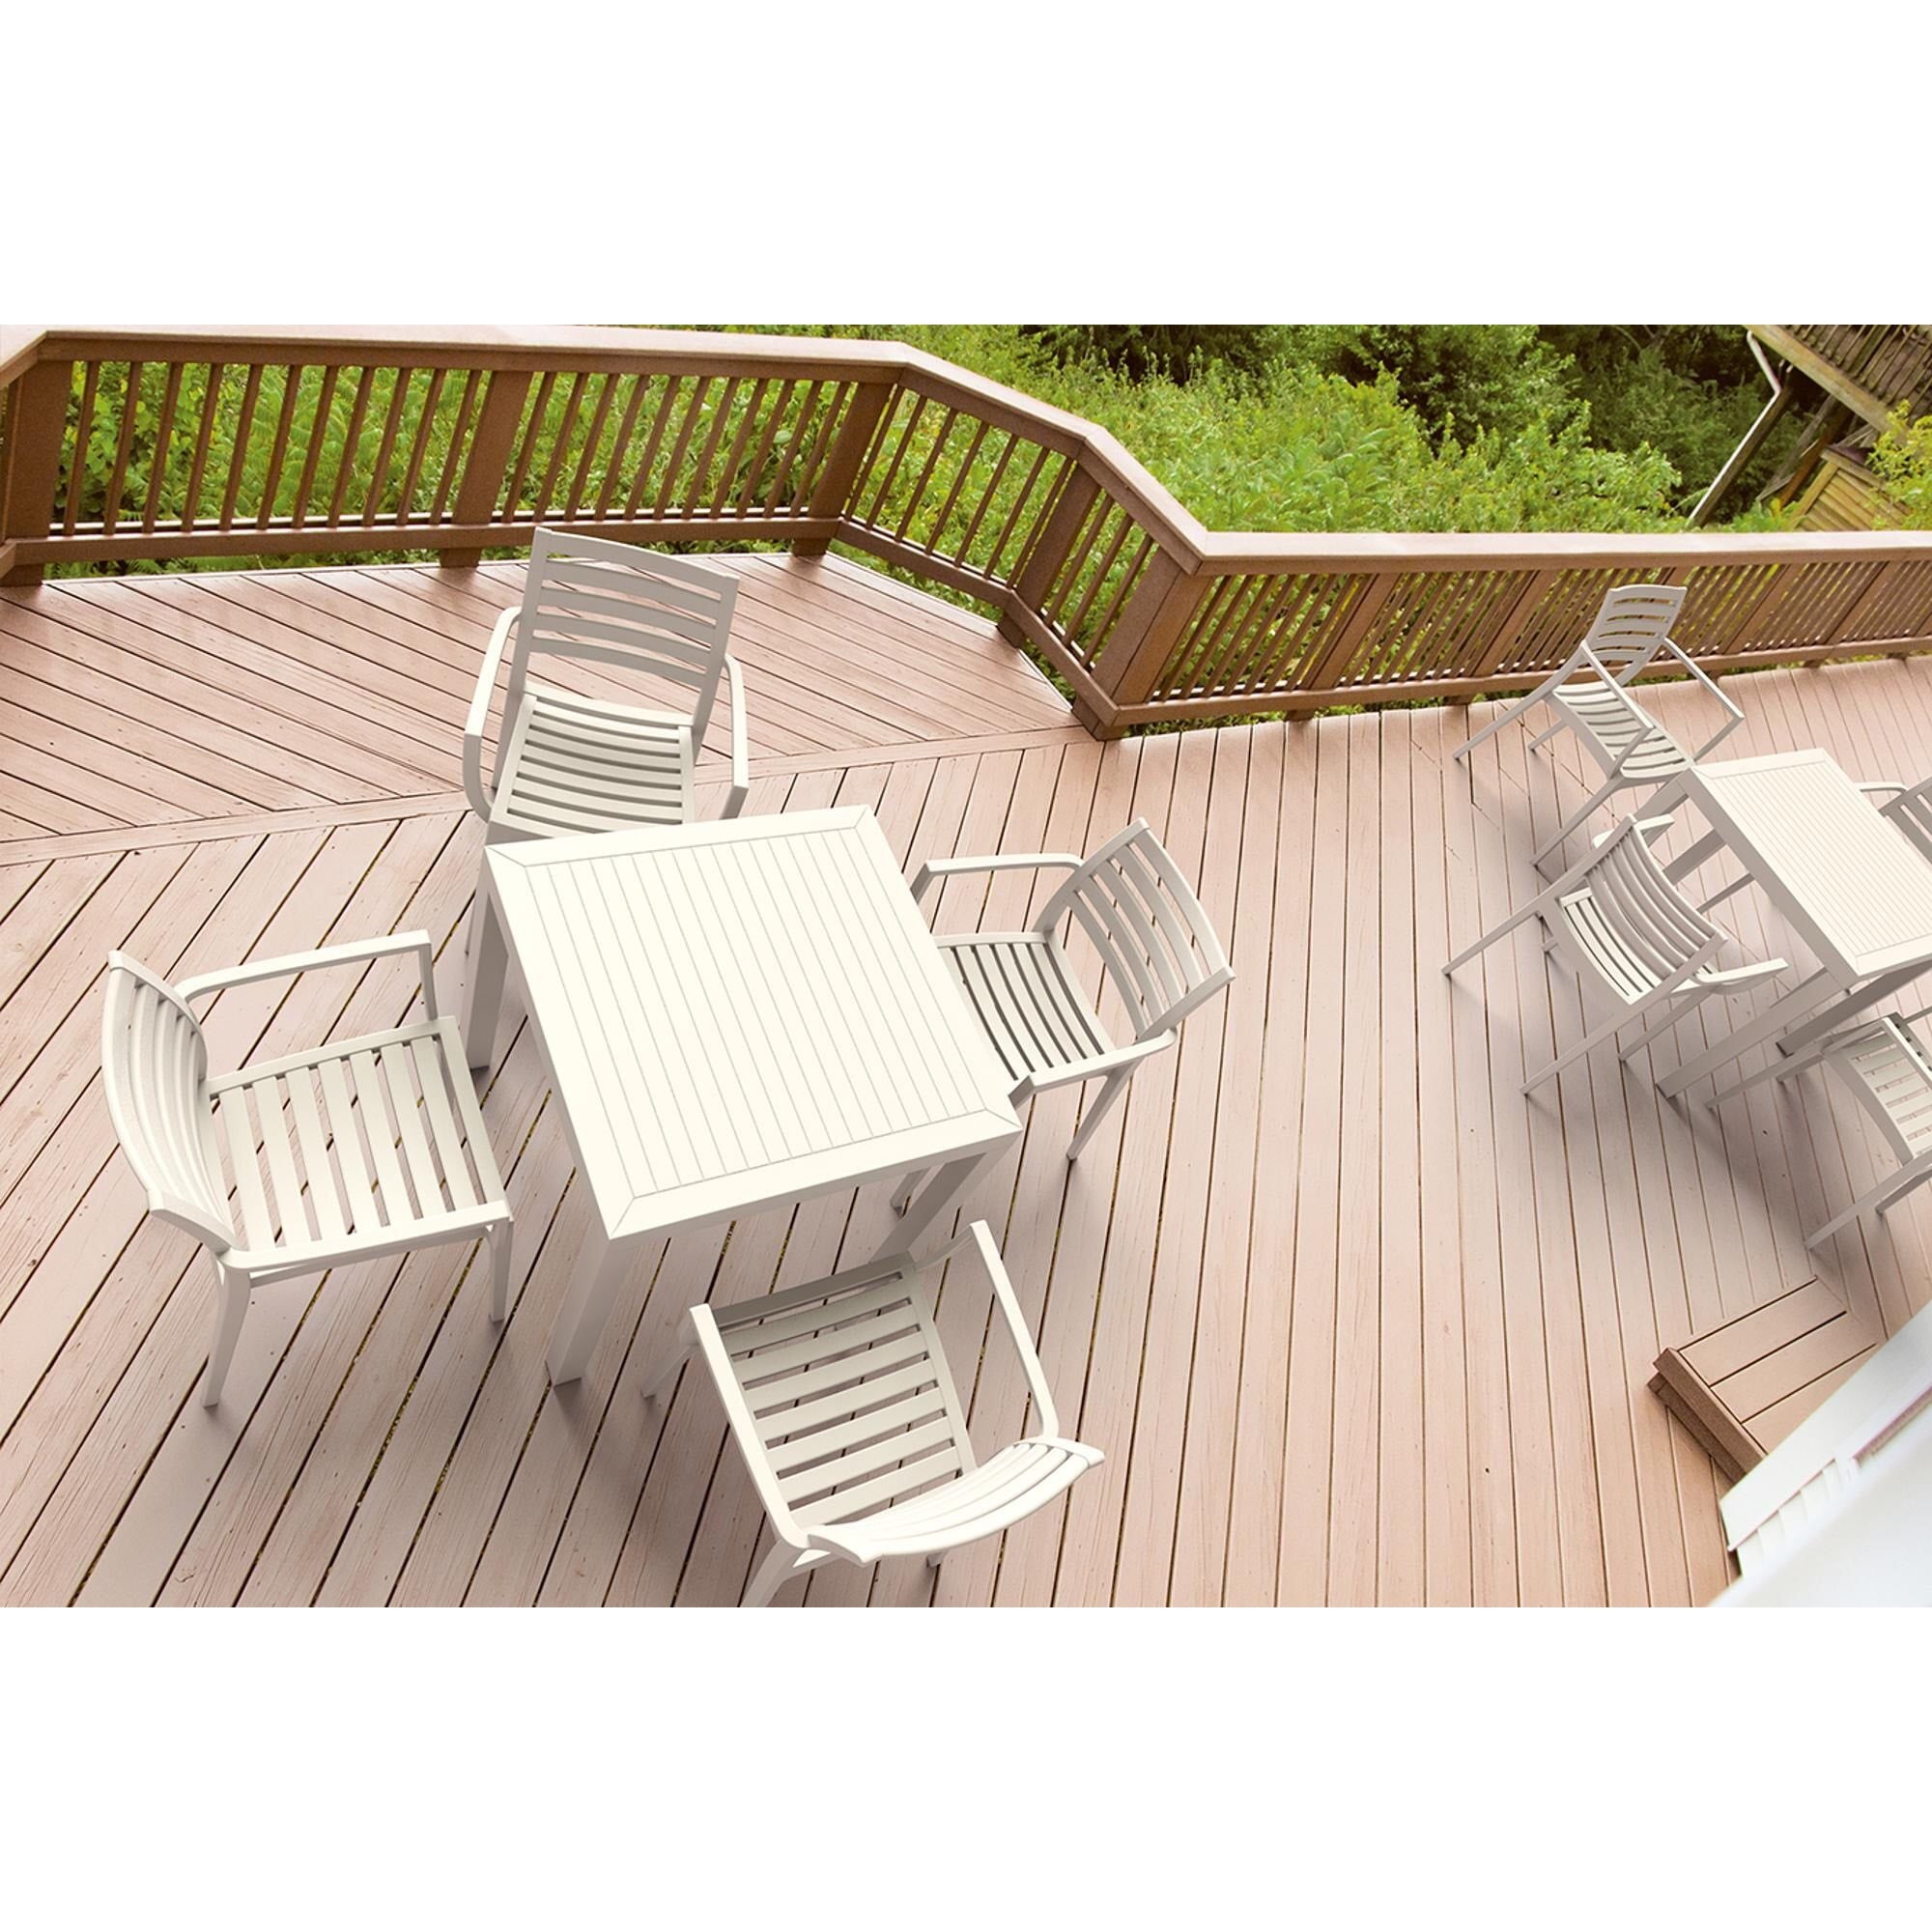 Garbar Arctic Square table indoors, outdoors 80x80 white